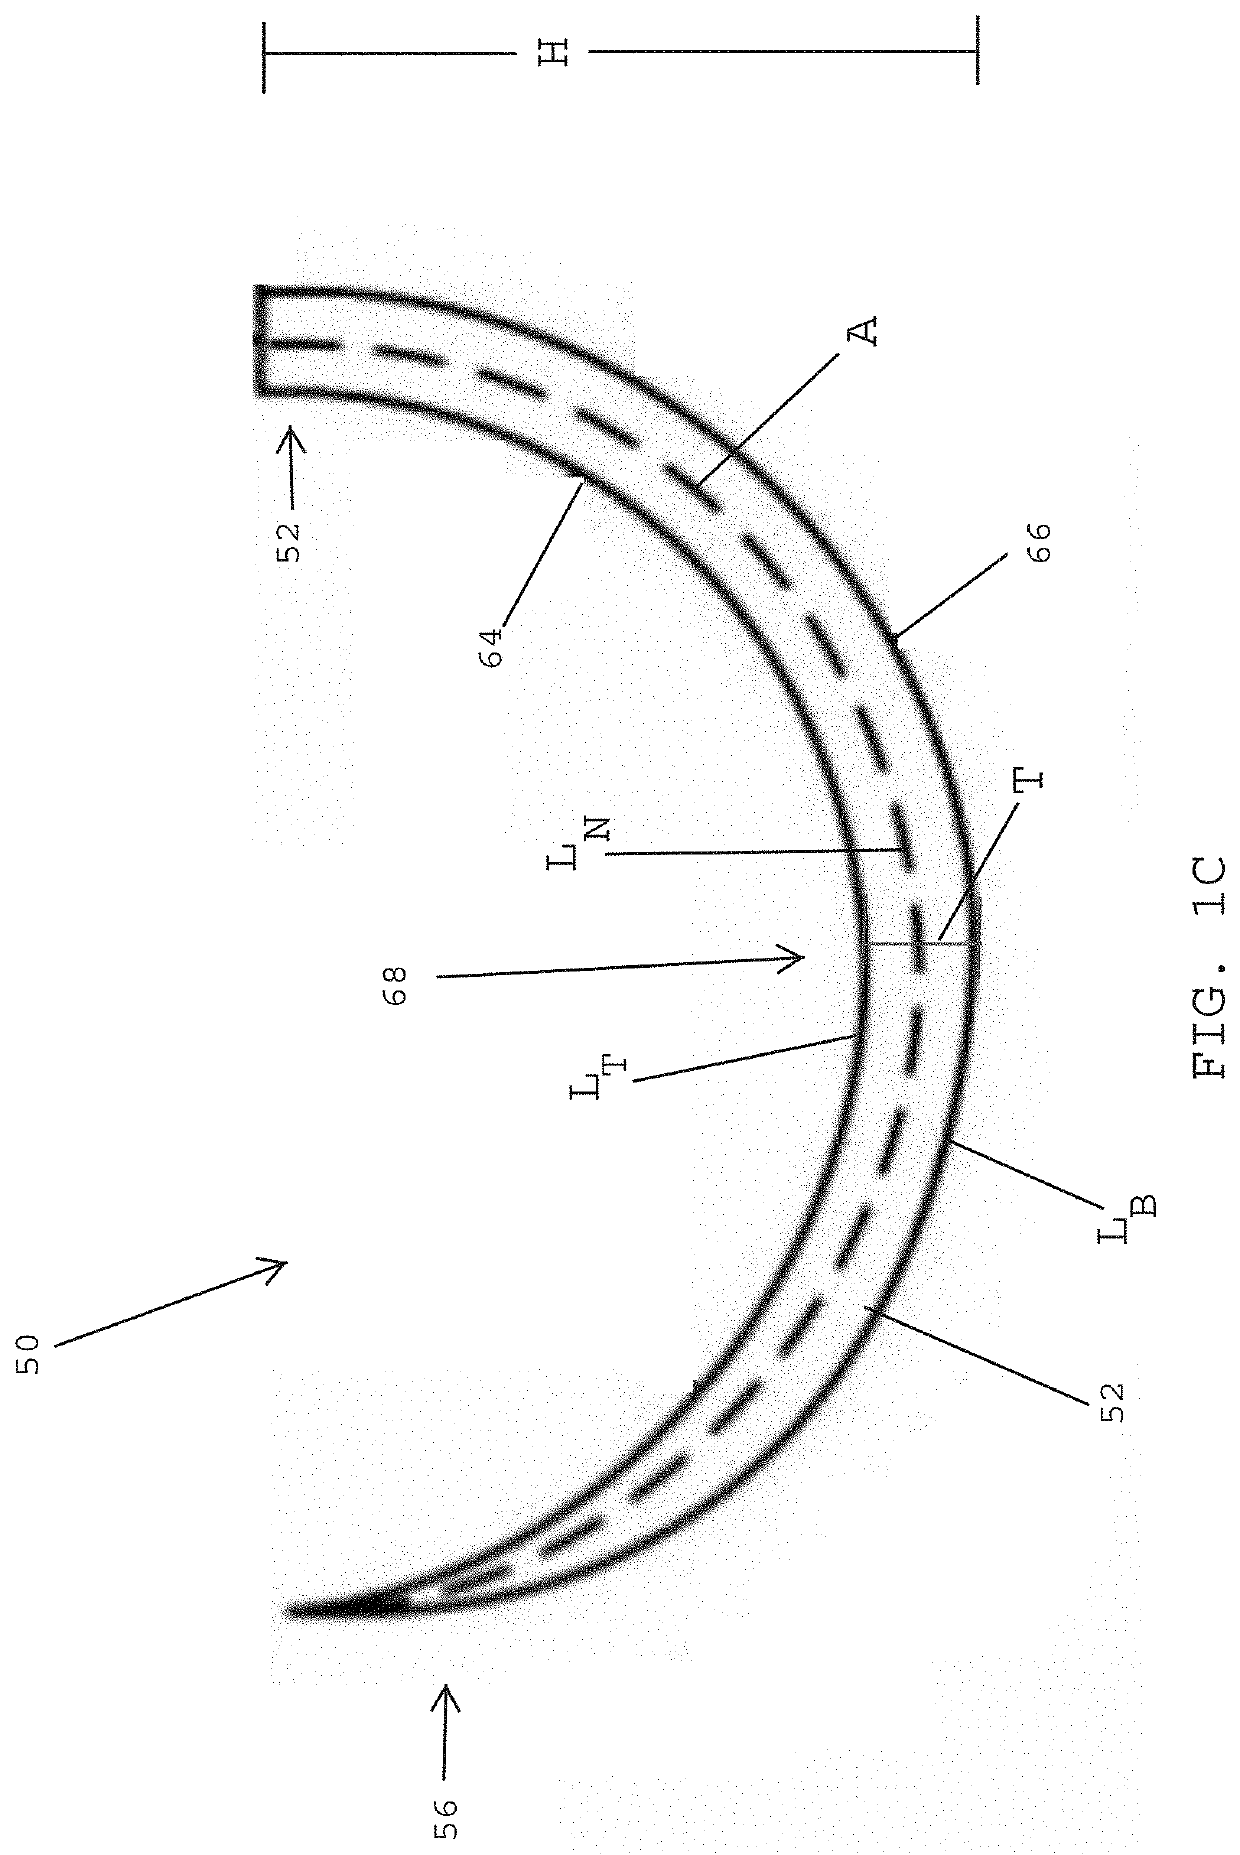 Composite suture needles having elastically deformable sections